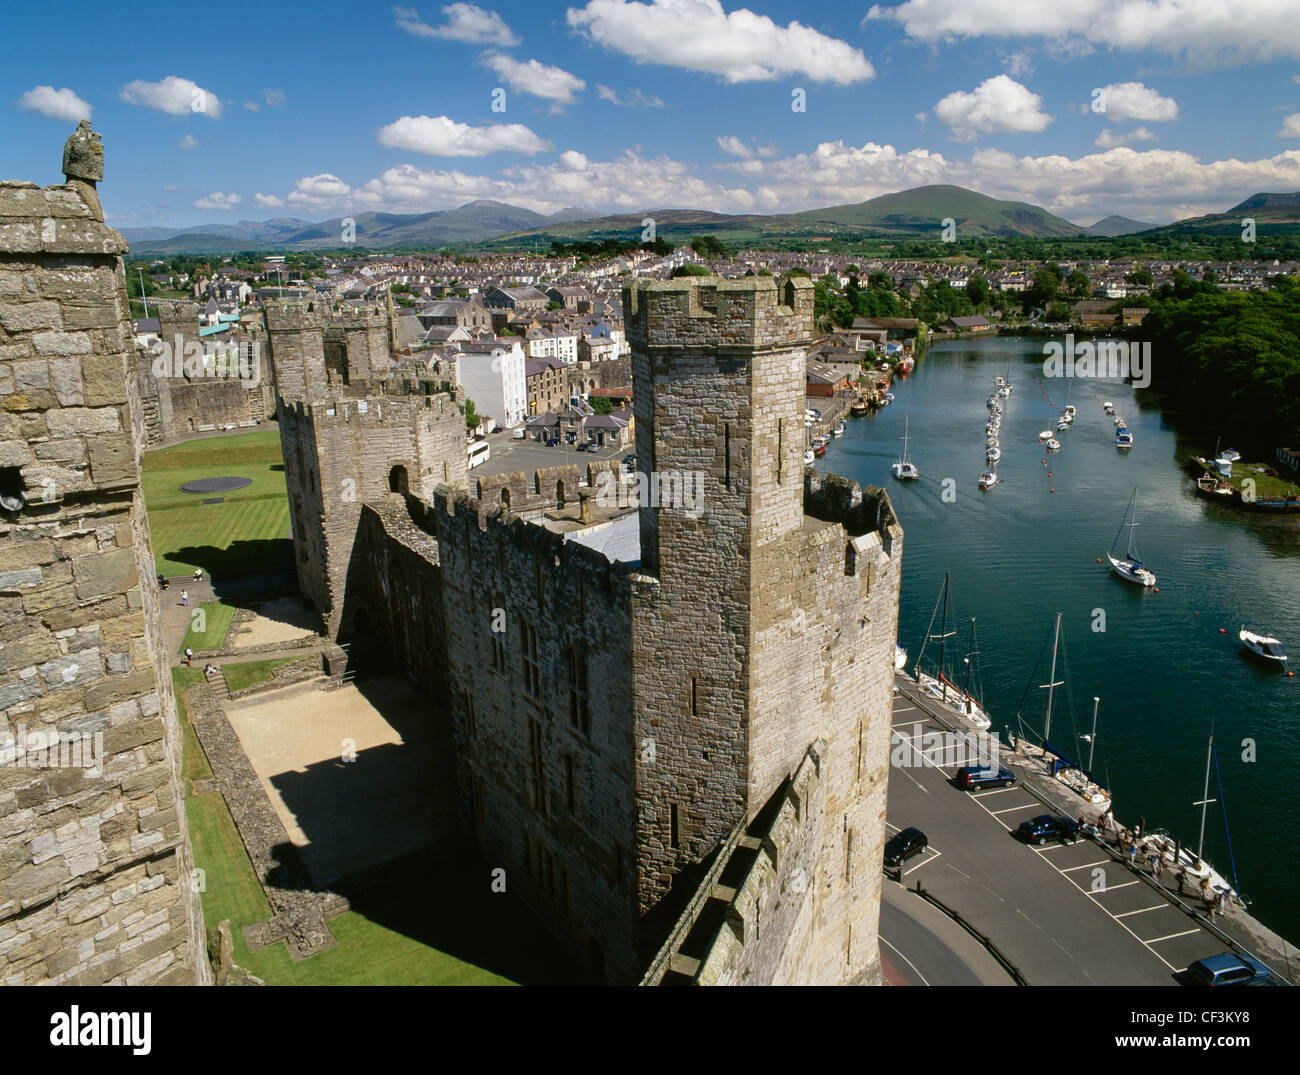 Looking SE from the Eagle Tower of Caernarfon Castle over the Queen's Tower, Slate Quay and the River (Afon) Seiont towards Moel Stock Photo